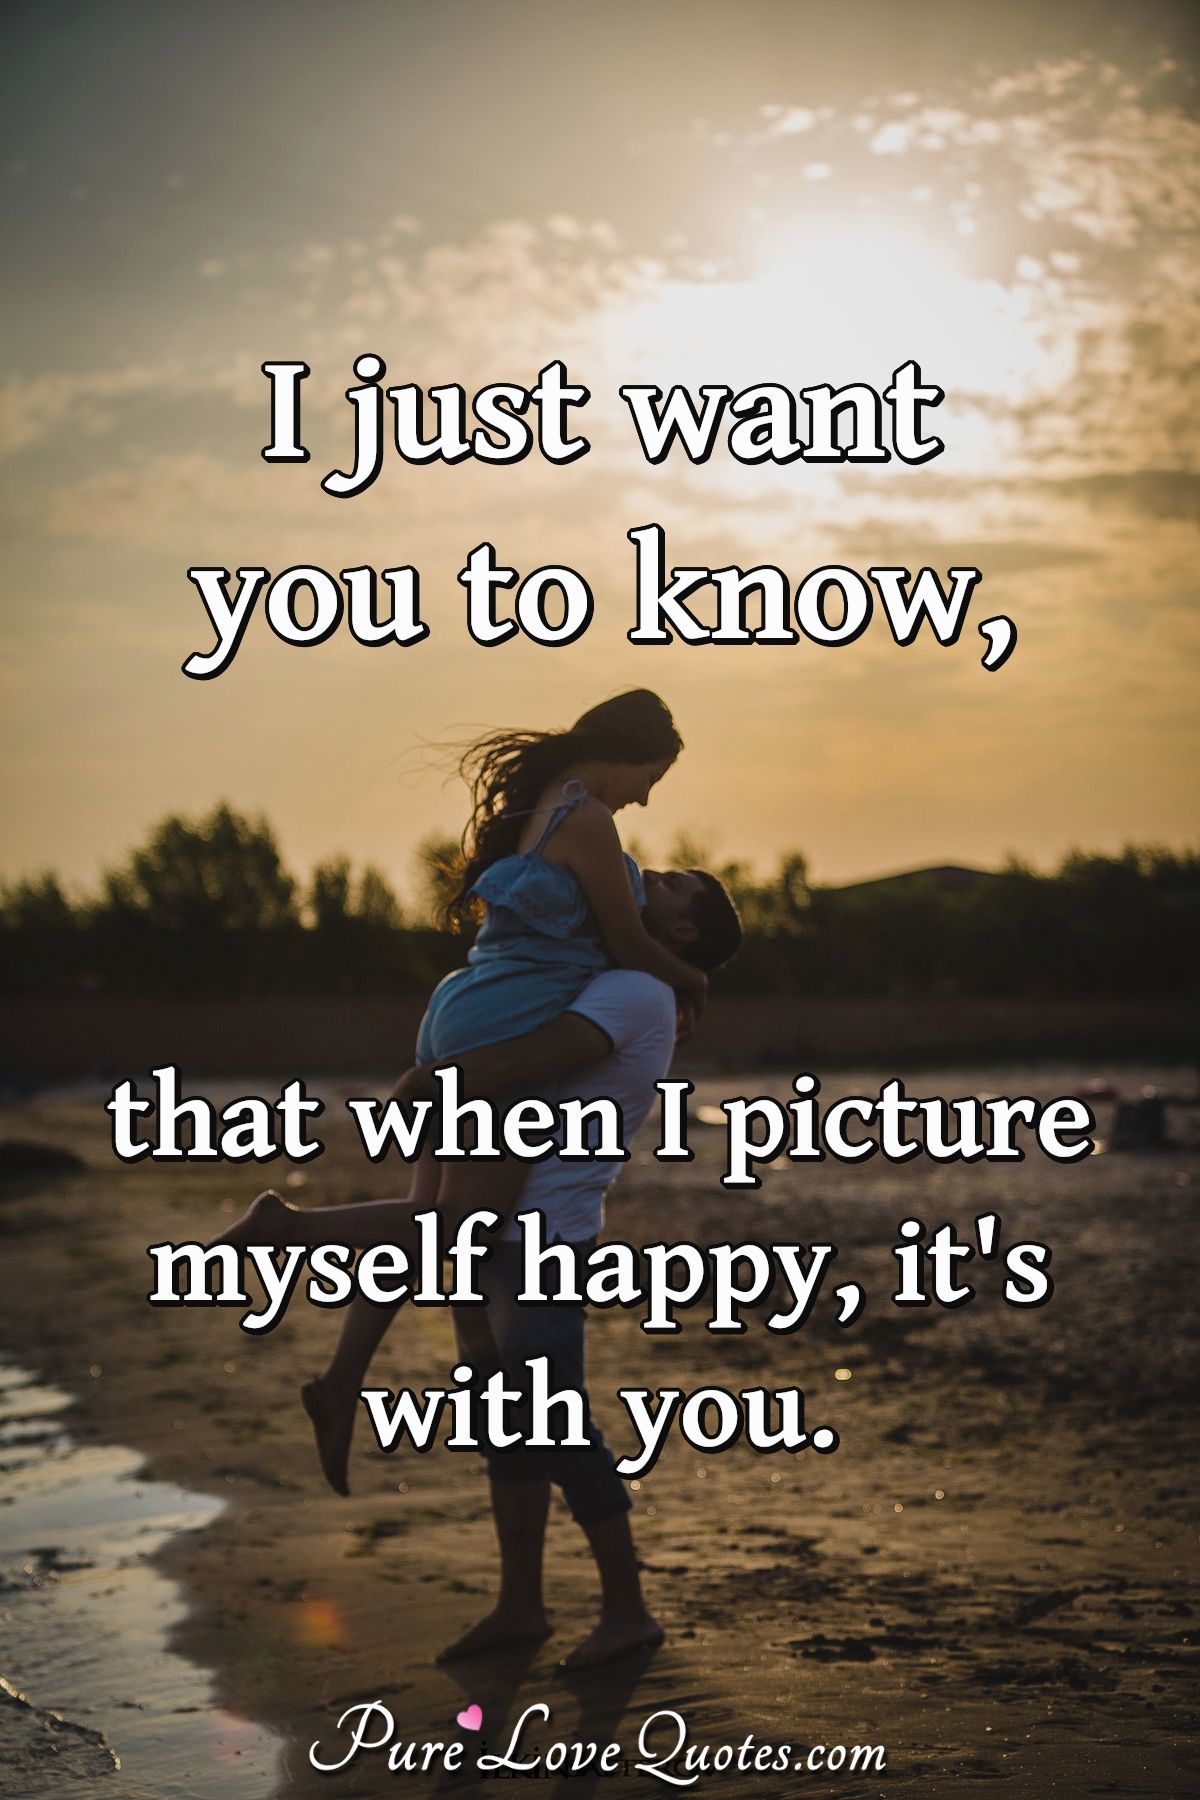 I Just Want You To Know, That When I Picture Myself Happy, It's With You. | Purelovequotes